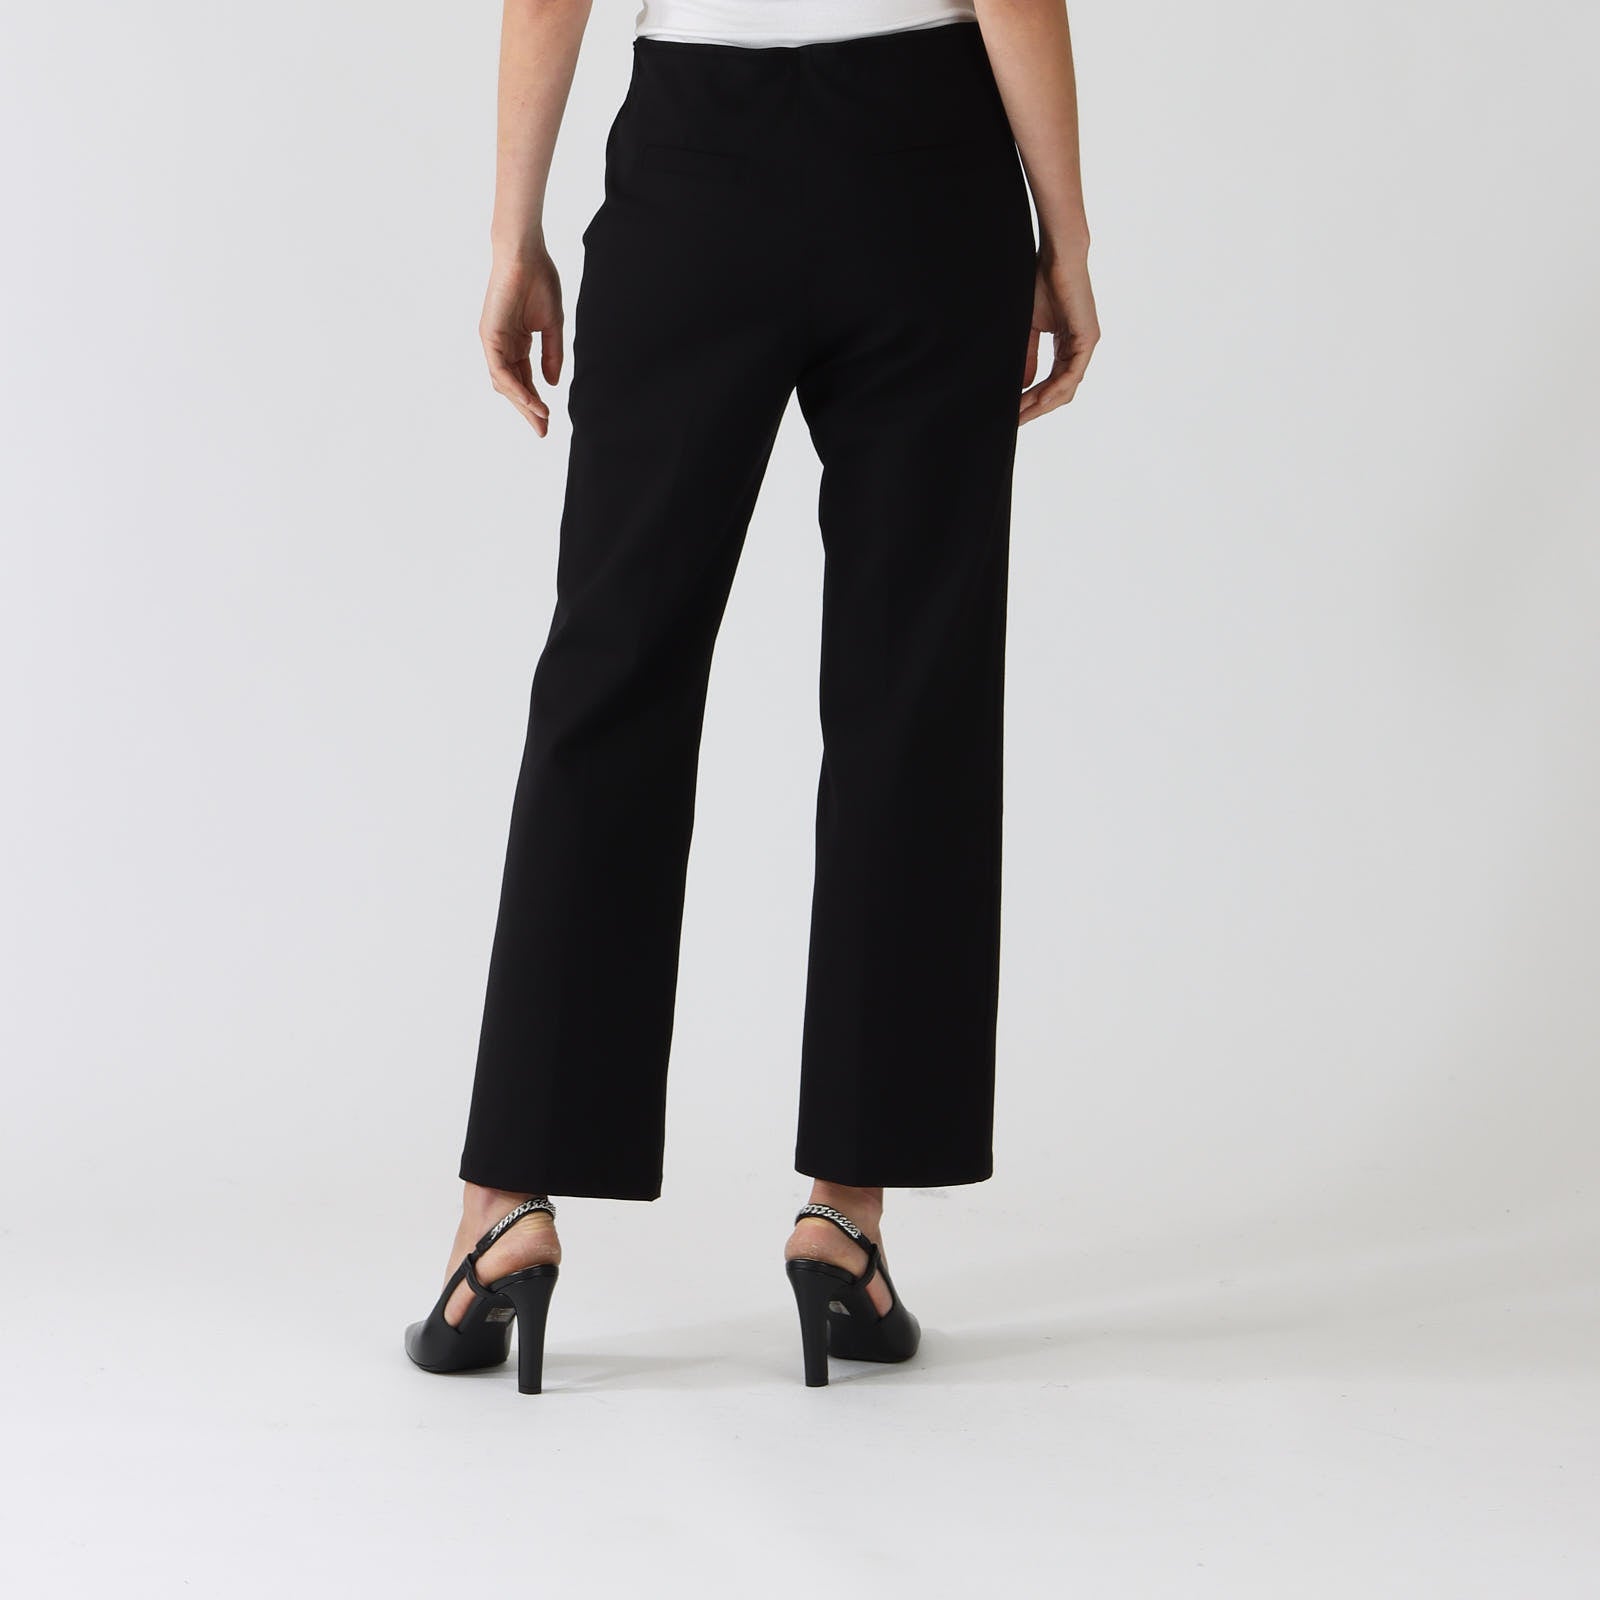 Lidia Black Sequin Embroidered Pants